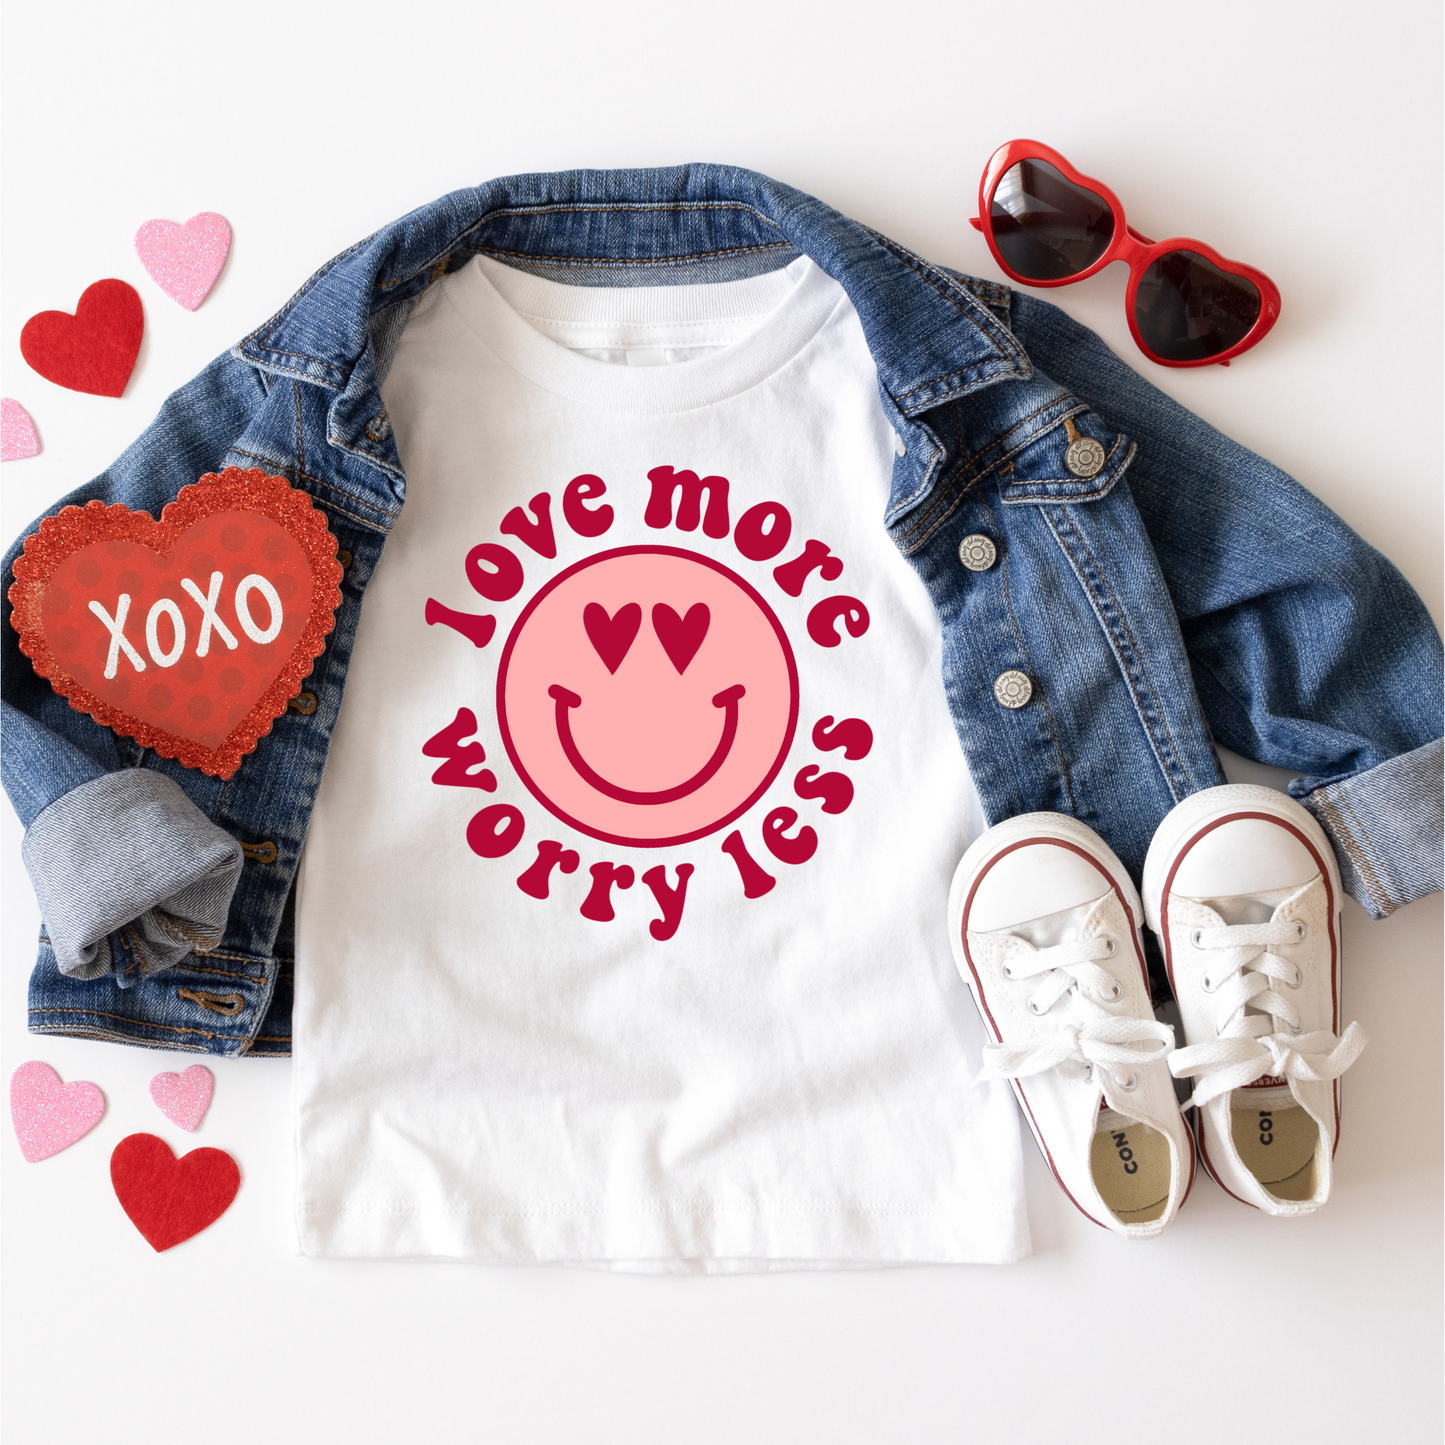 Love More Worry Less Graphic Tee